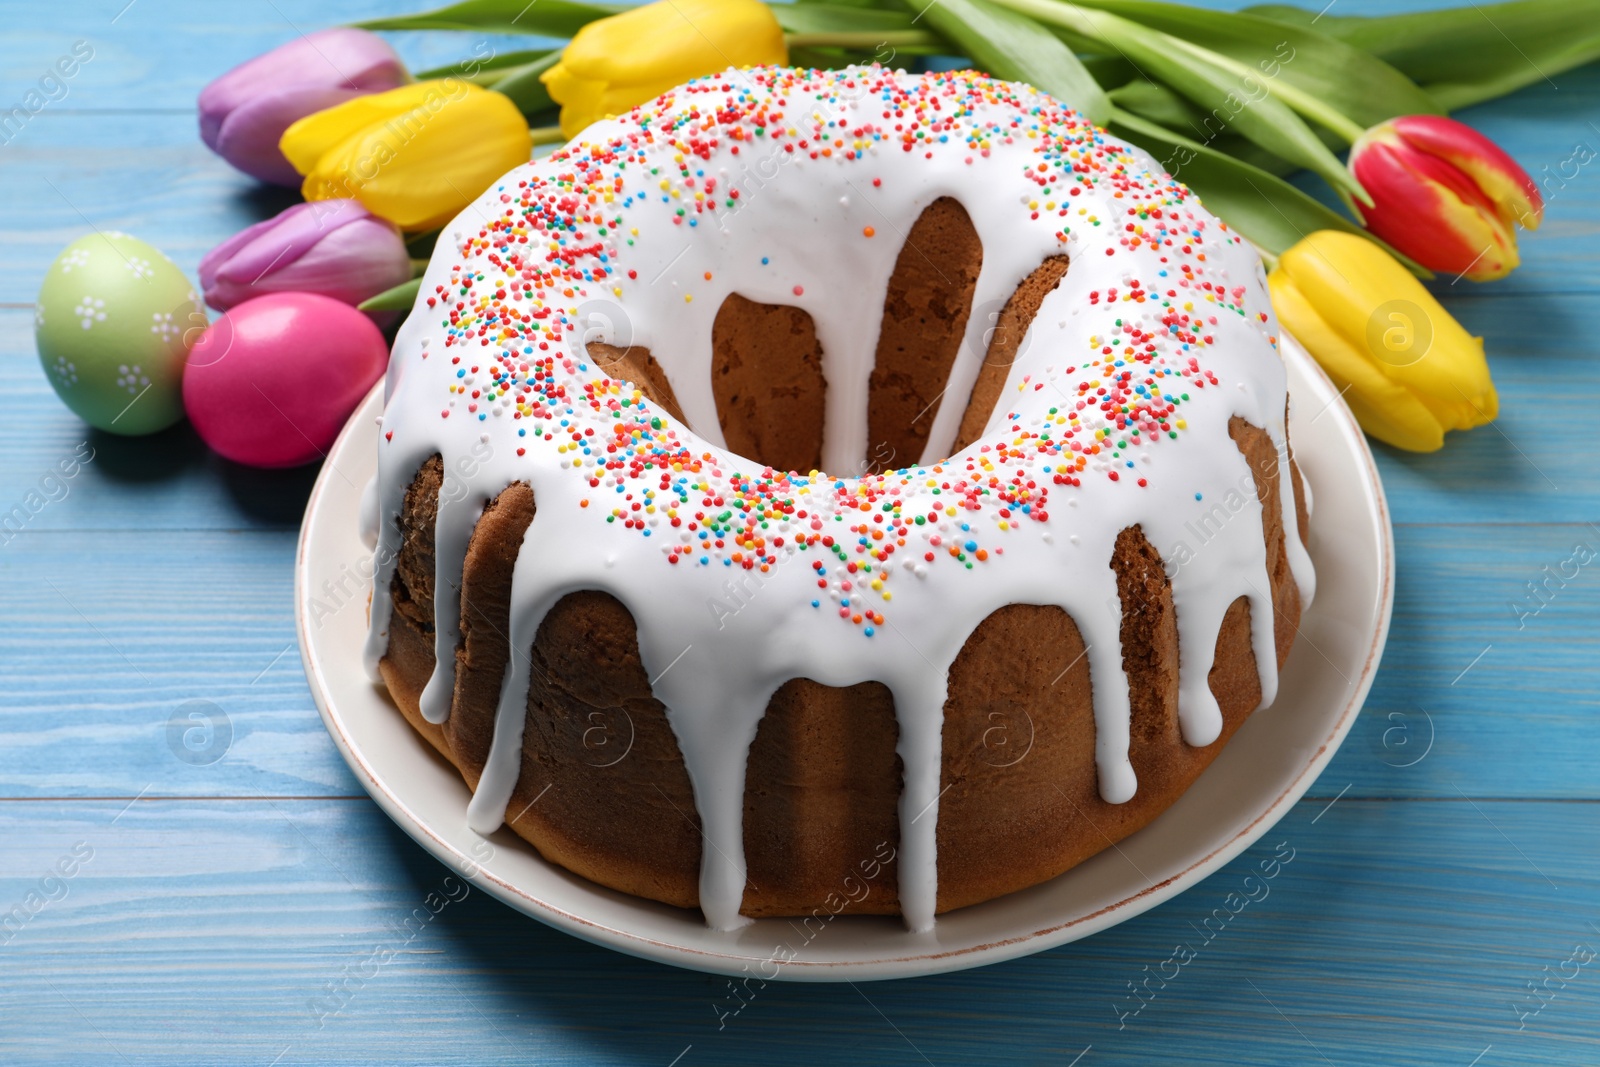 Photo of Glazed Easter cake with sprinkles, painted eggs and tulips on blue wooden table, closeup